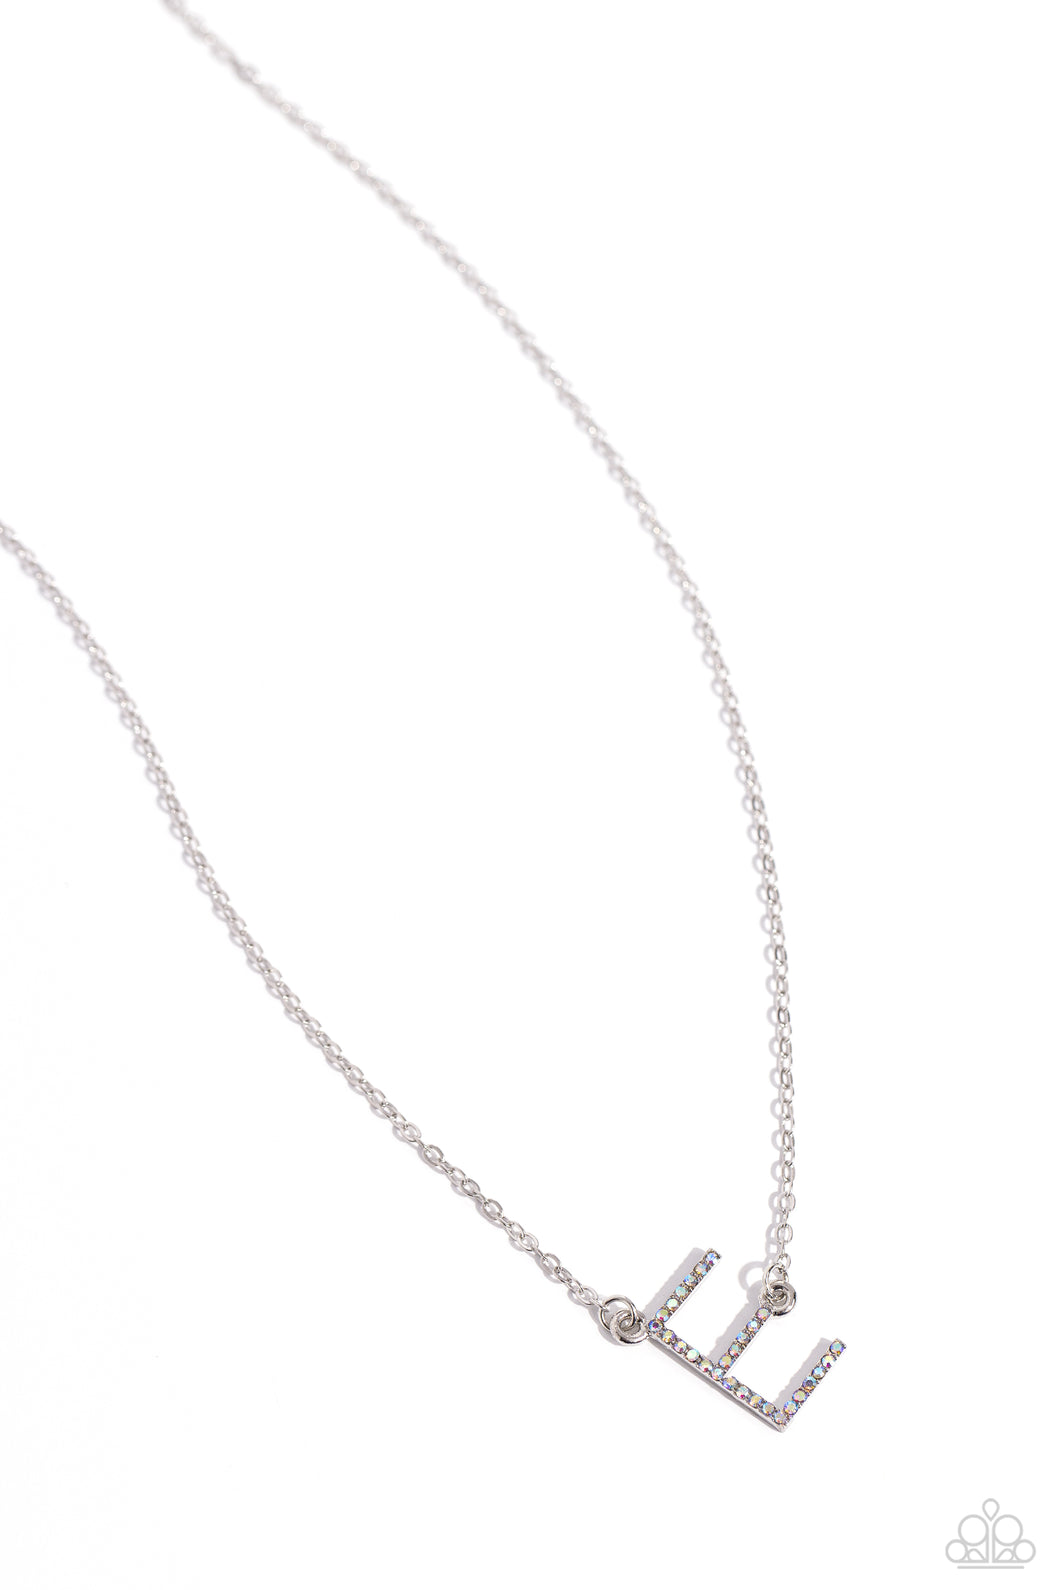 INITIALLY Yours - E - Multi (Iridescent) Necklace